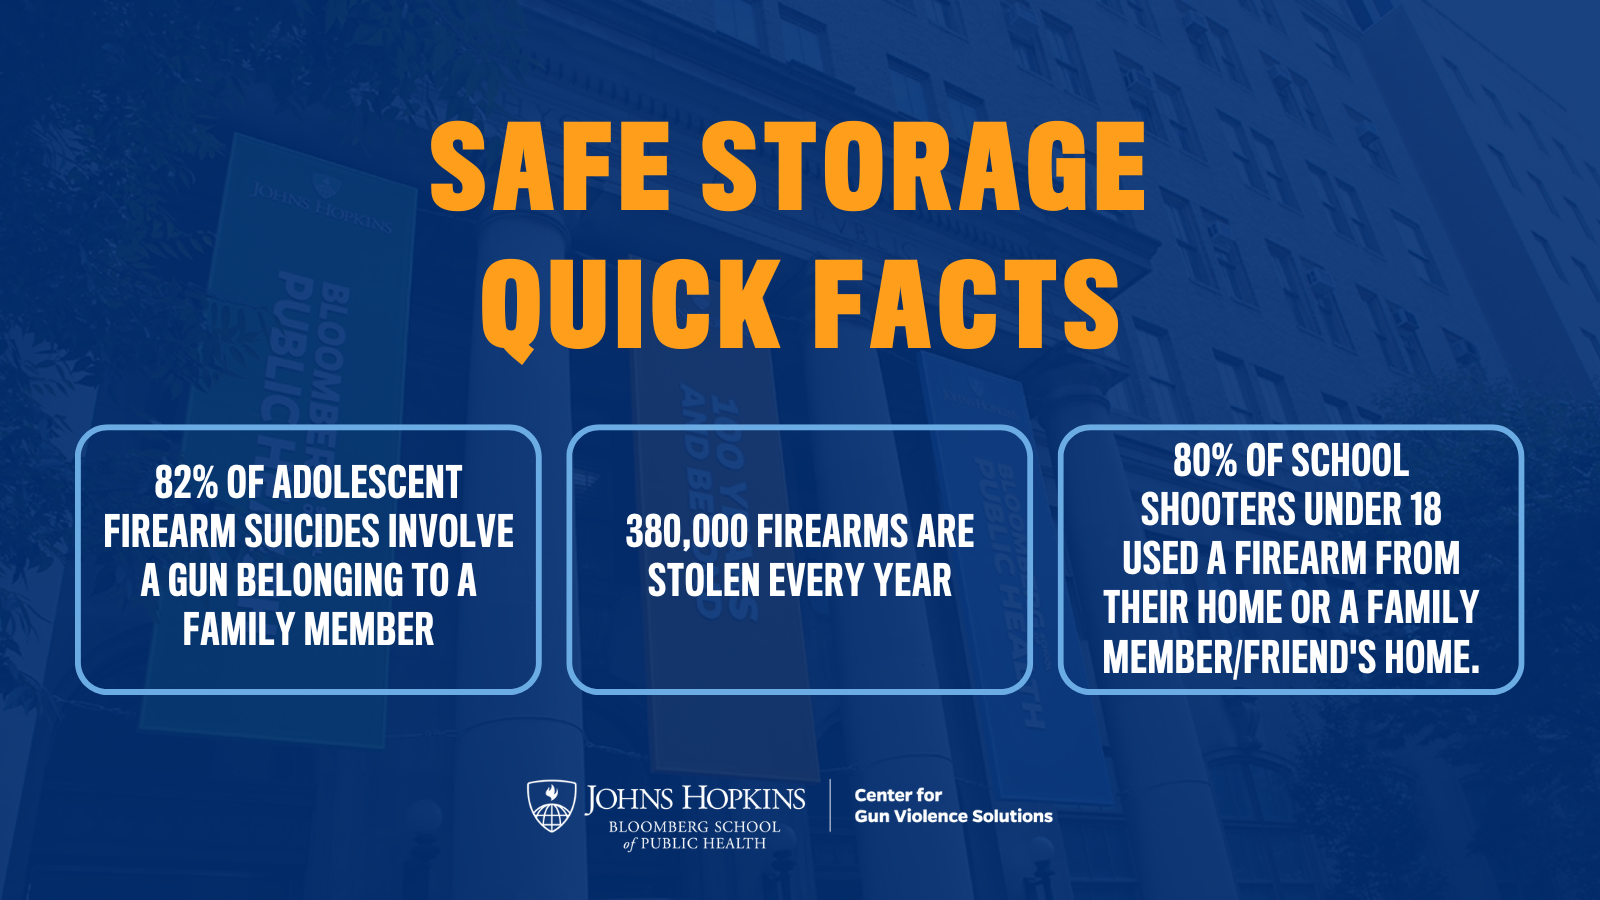 Safe Storage Quick Facts. 82% of adolescent firearm suicides involve a gun belonging to a family member. 380,000 firearms are stolen every year. 80% of school shooters under 18 used a firearm from their home or a family member/friend's home.